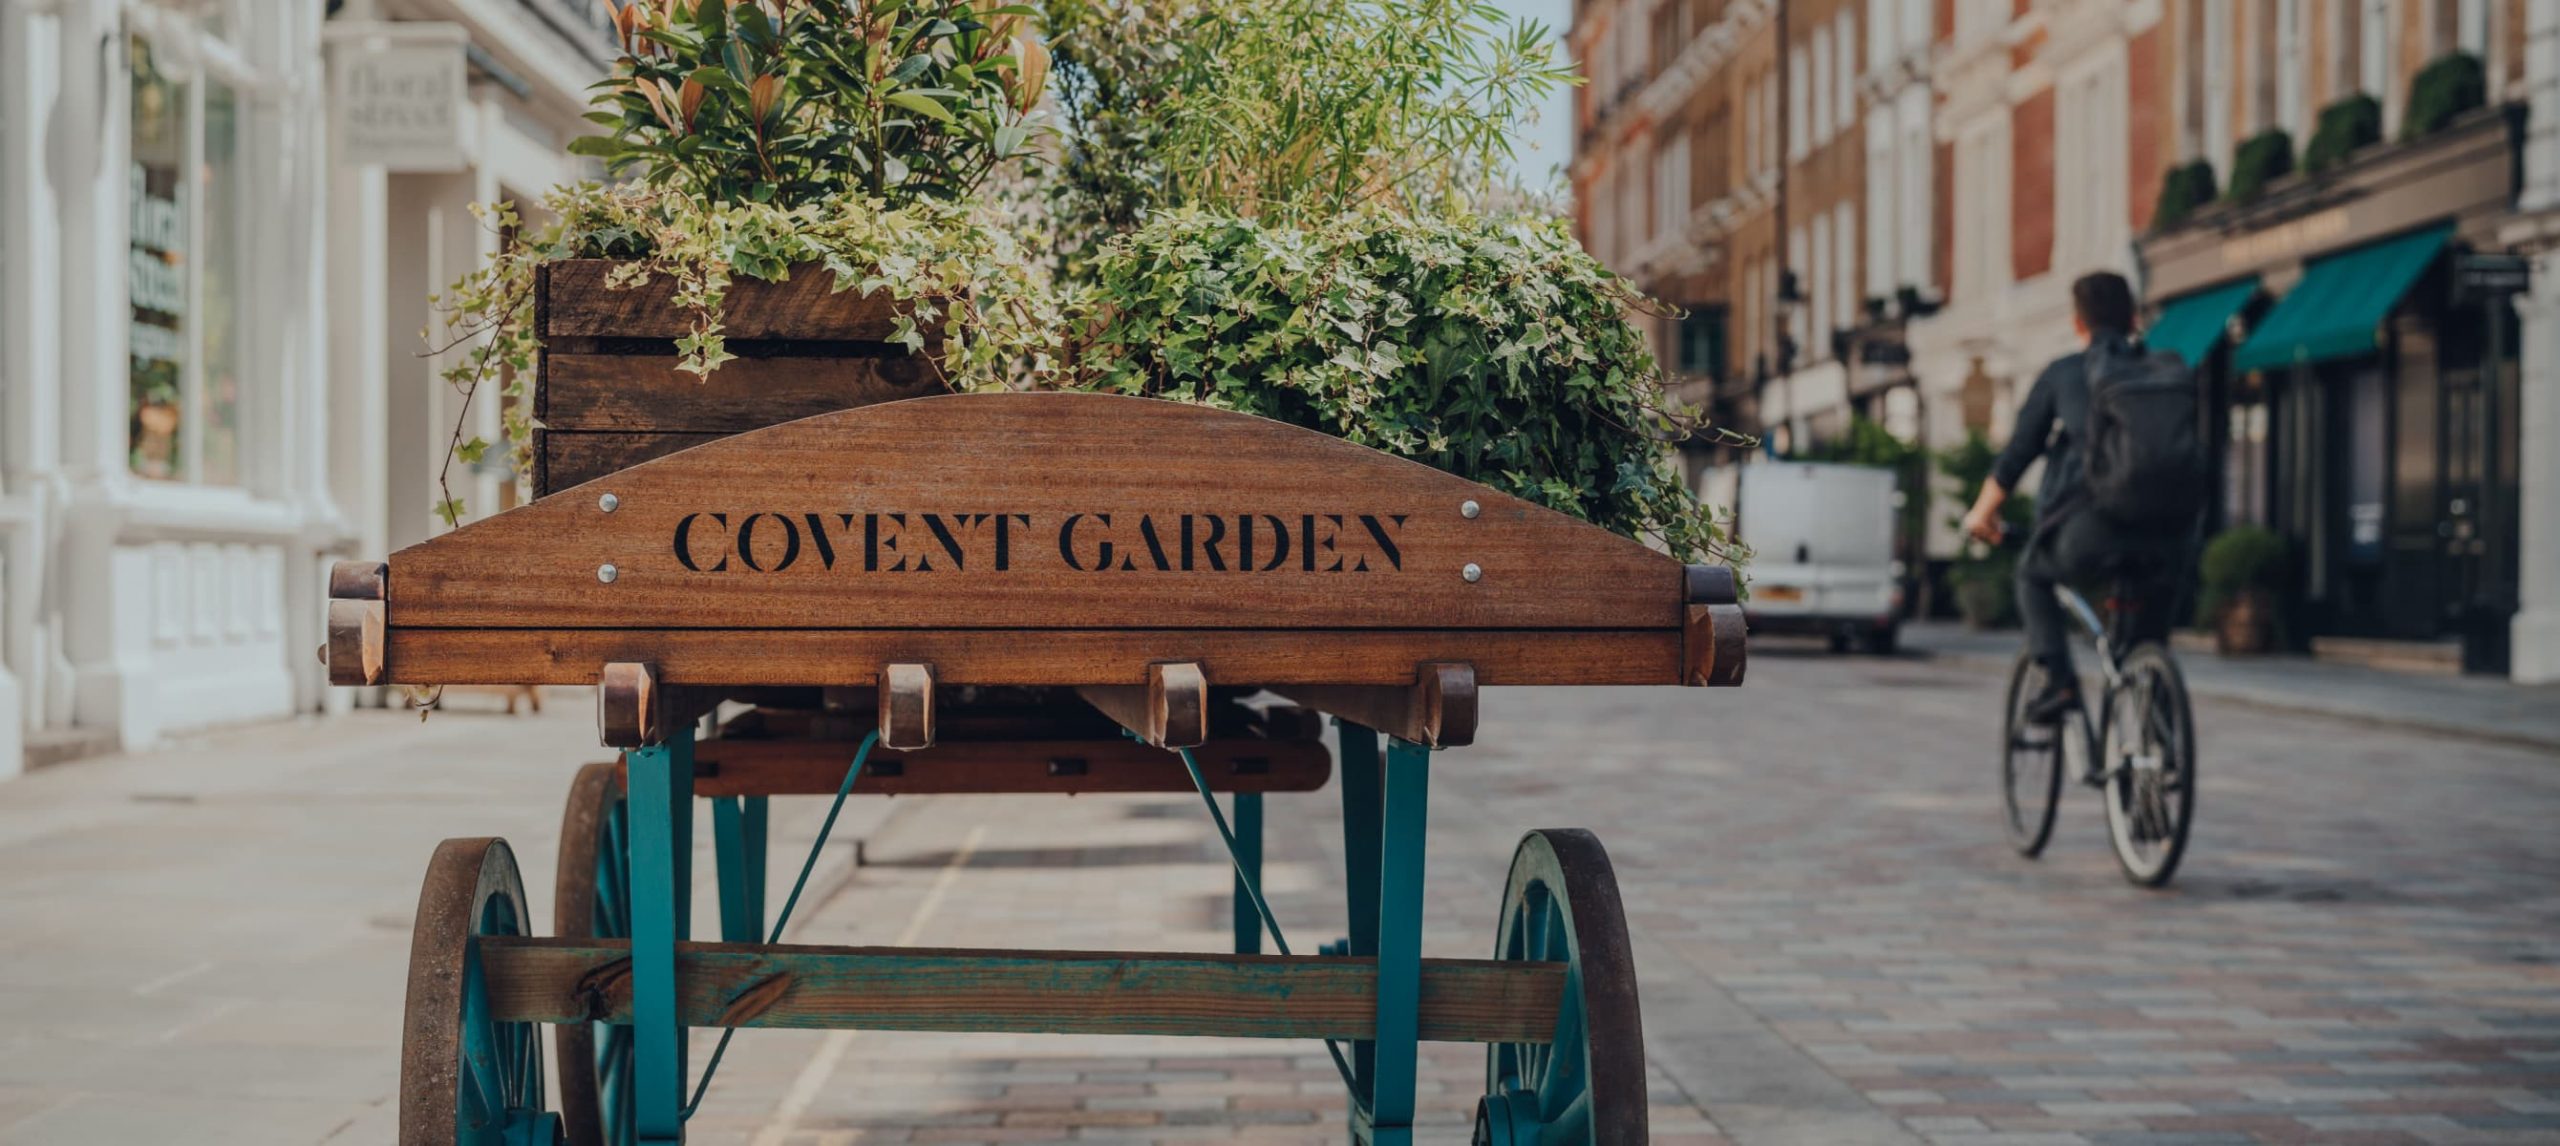 The Best Hotels In Covent Garden Area, London, UK